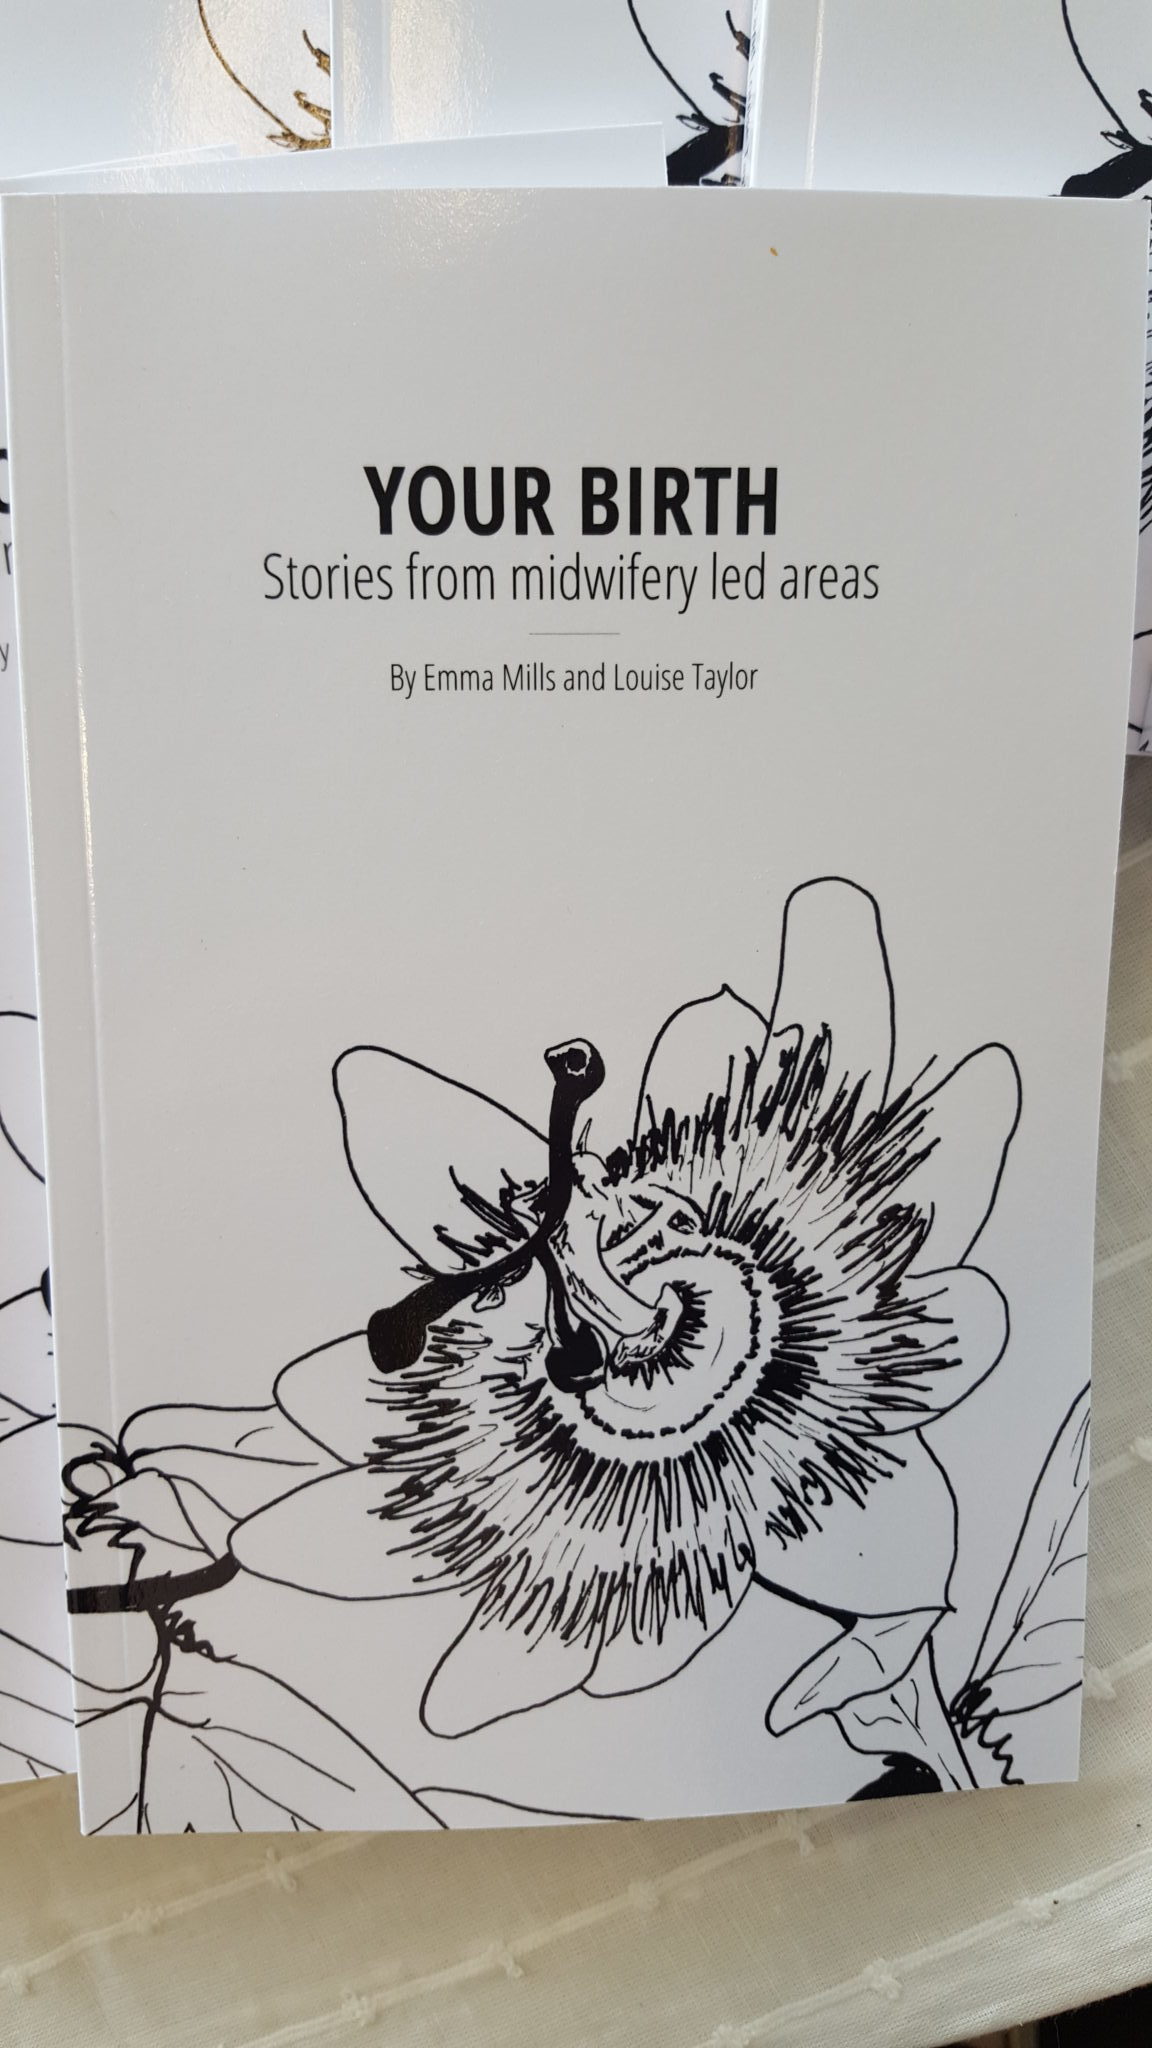 Your Birth is available on Amazon